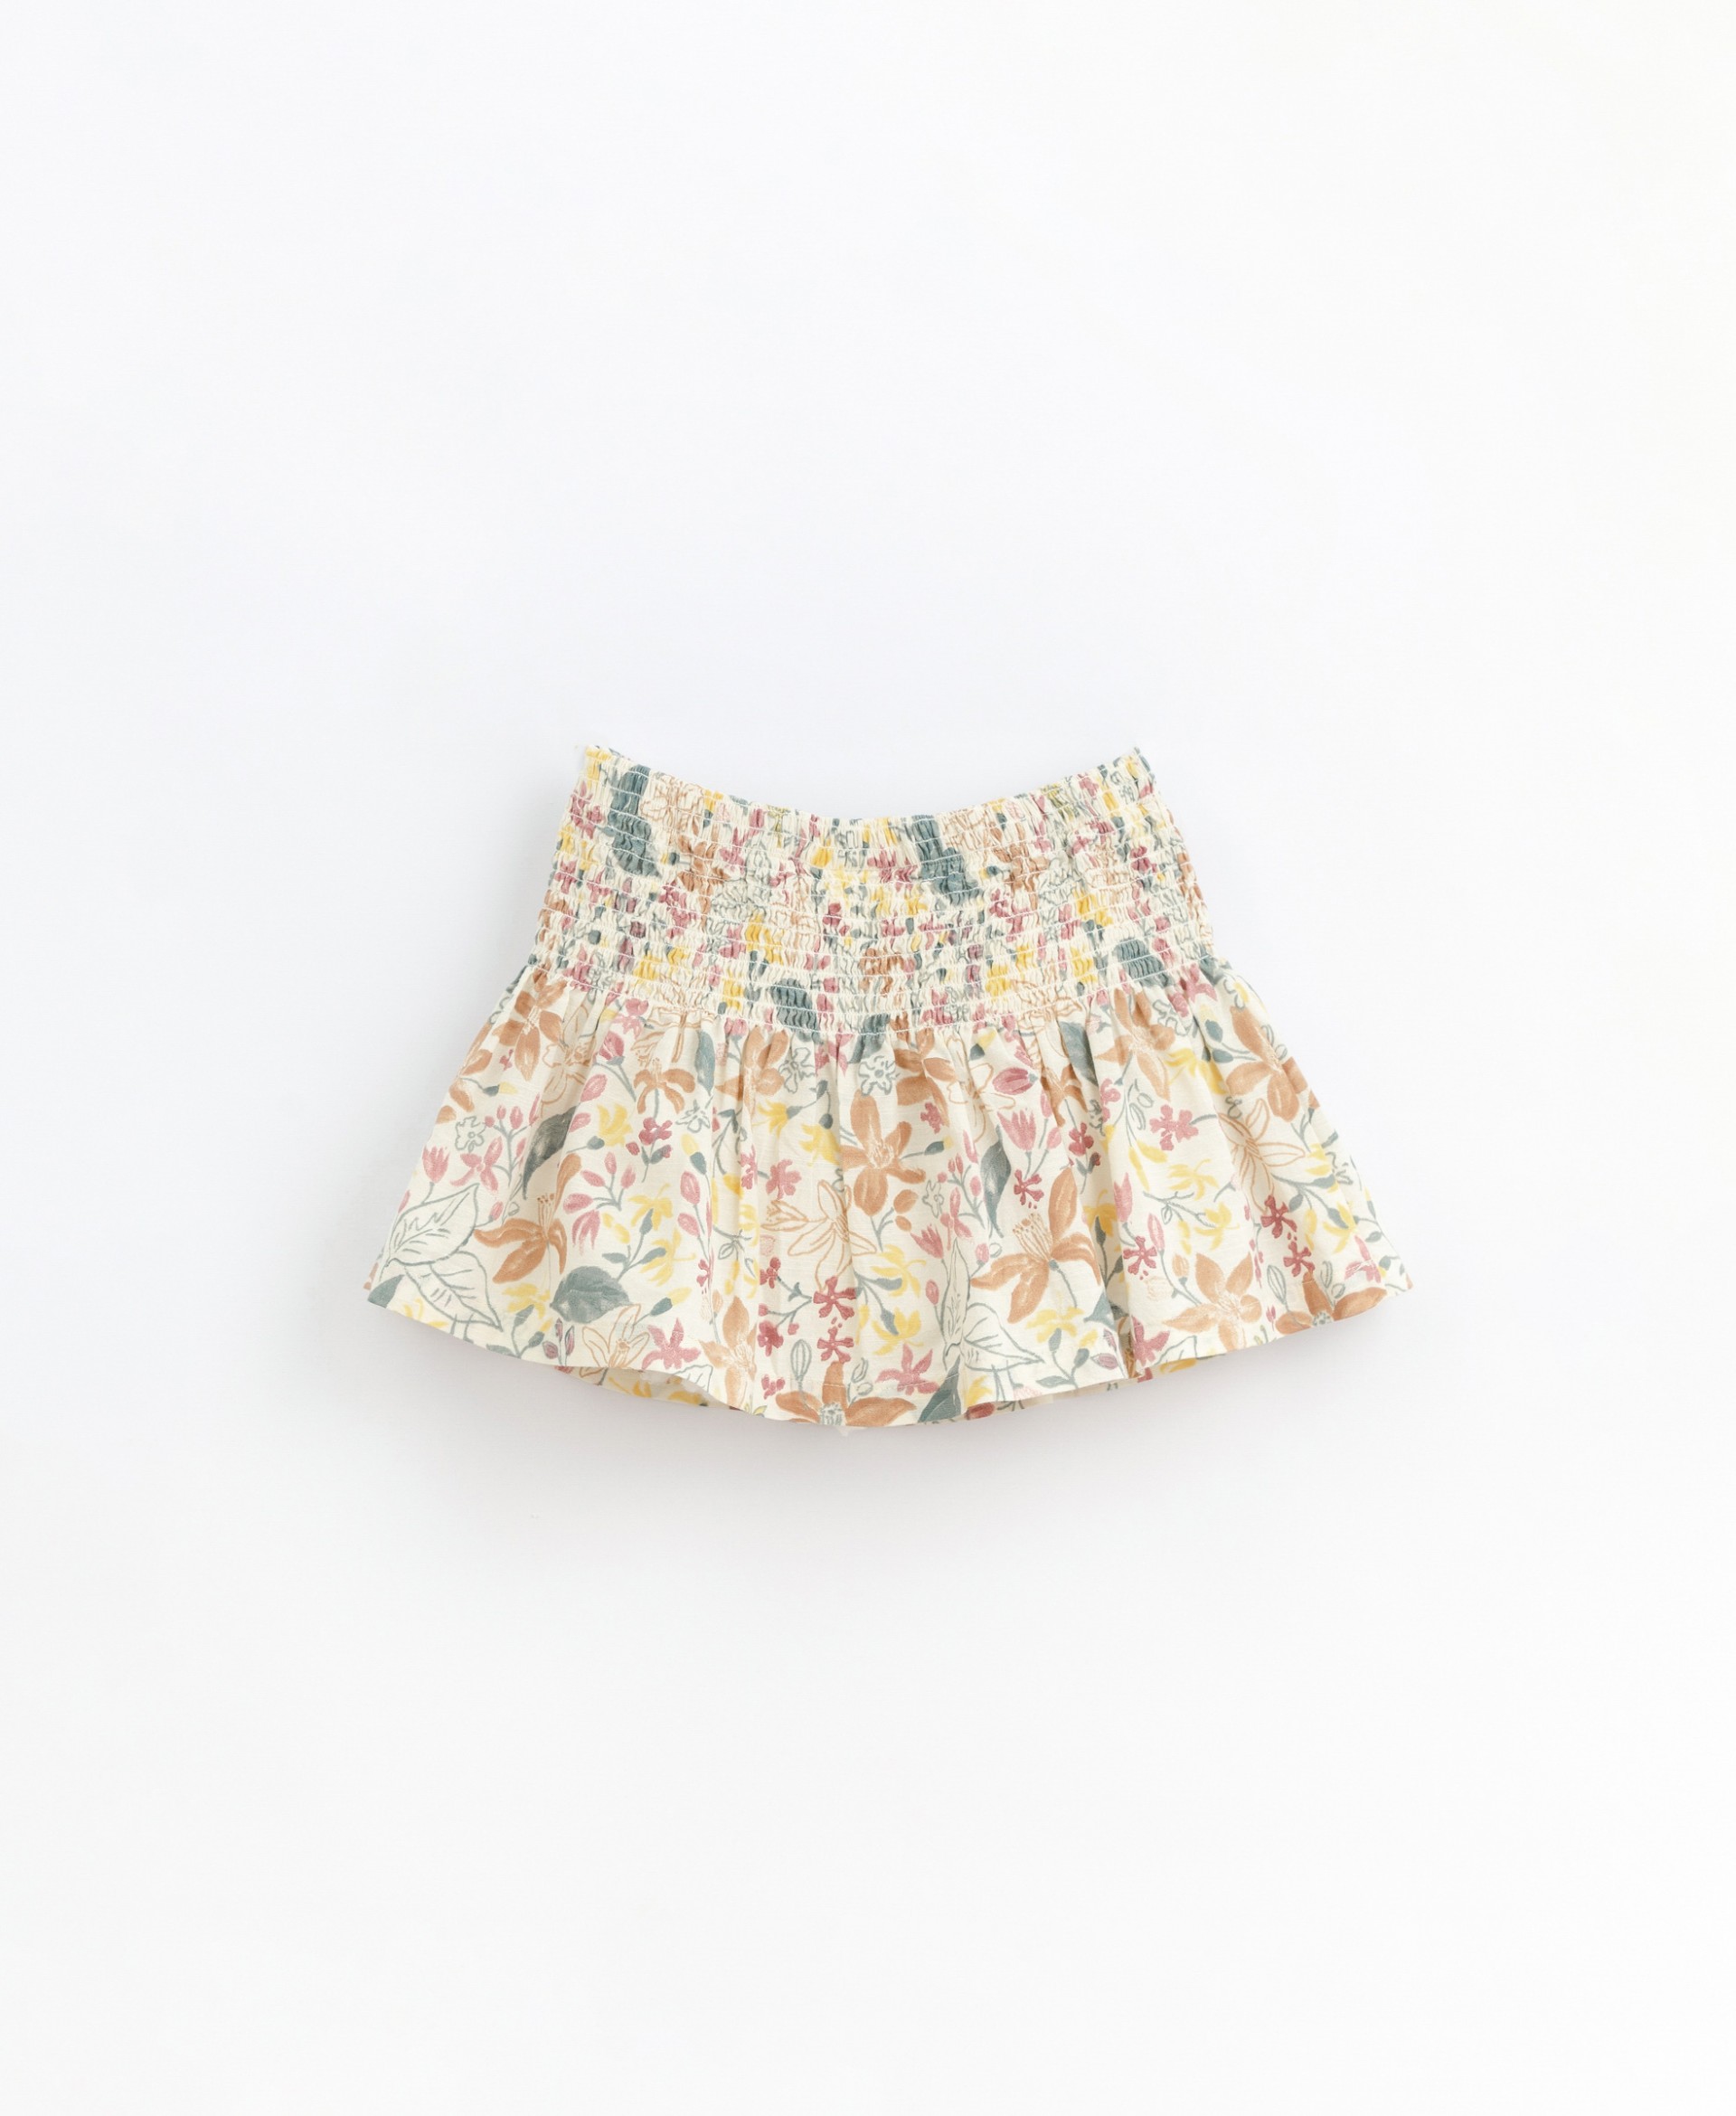 Skirt in organic cotton and cotton blend | Basketry